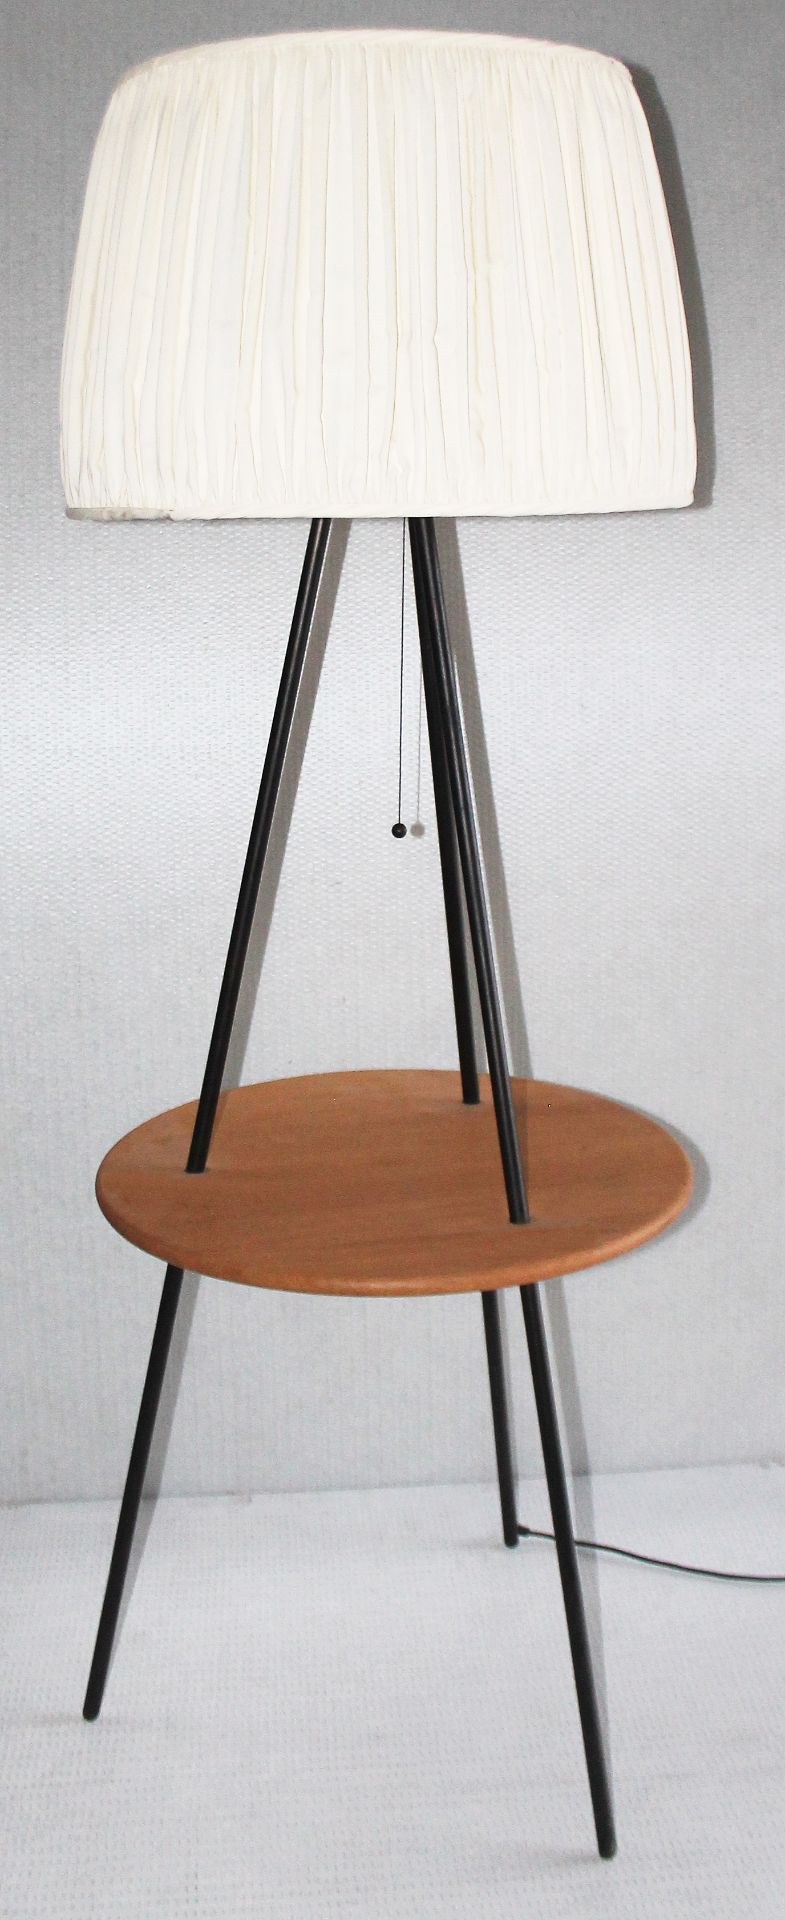 1 x TERENCE CONRAN / BENCHMARK 'Leading Light' Solid Oak Designer Lamp With Ruched Shade - Image 6 of 6